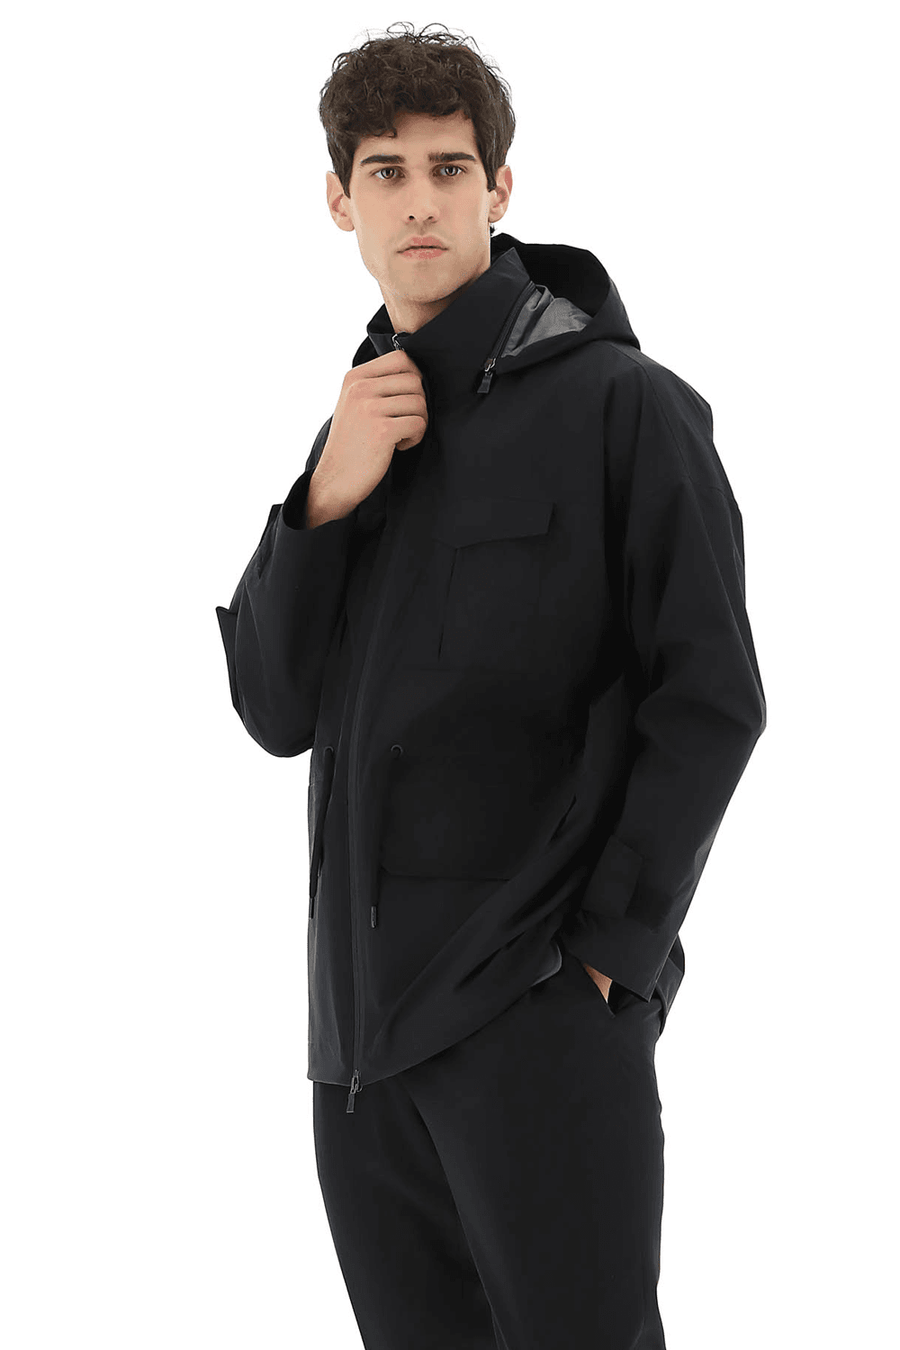 Buy the Herno Gore-Tex 2Layer And Opalescent Laminar Jacket in Black at Intro. Spend £50 for free UK delivery. Official stockists. We ship worldwide.